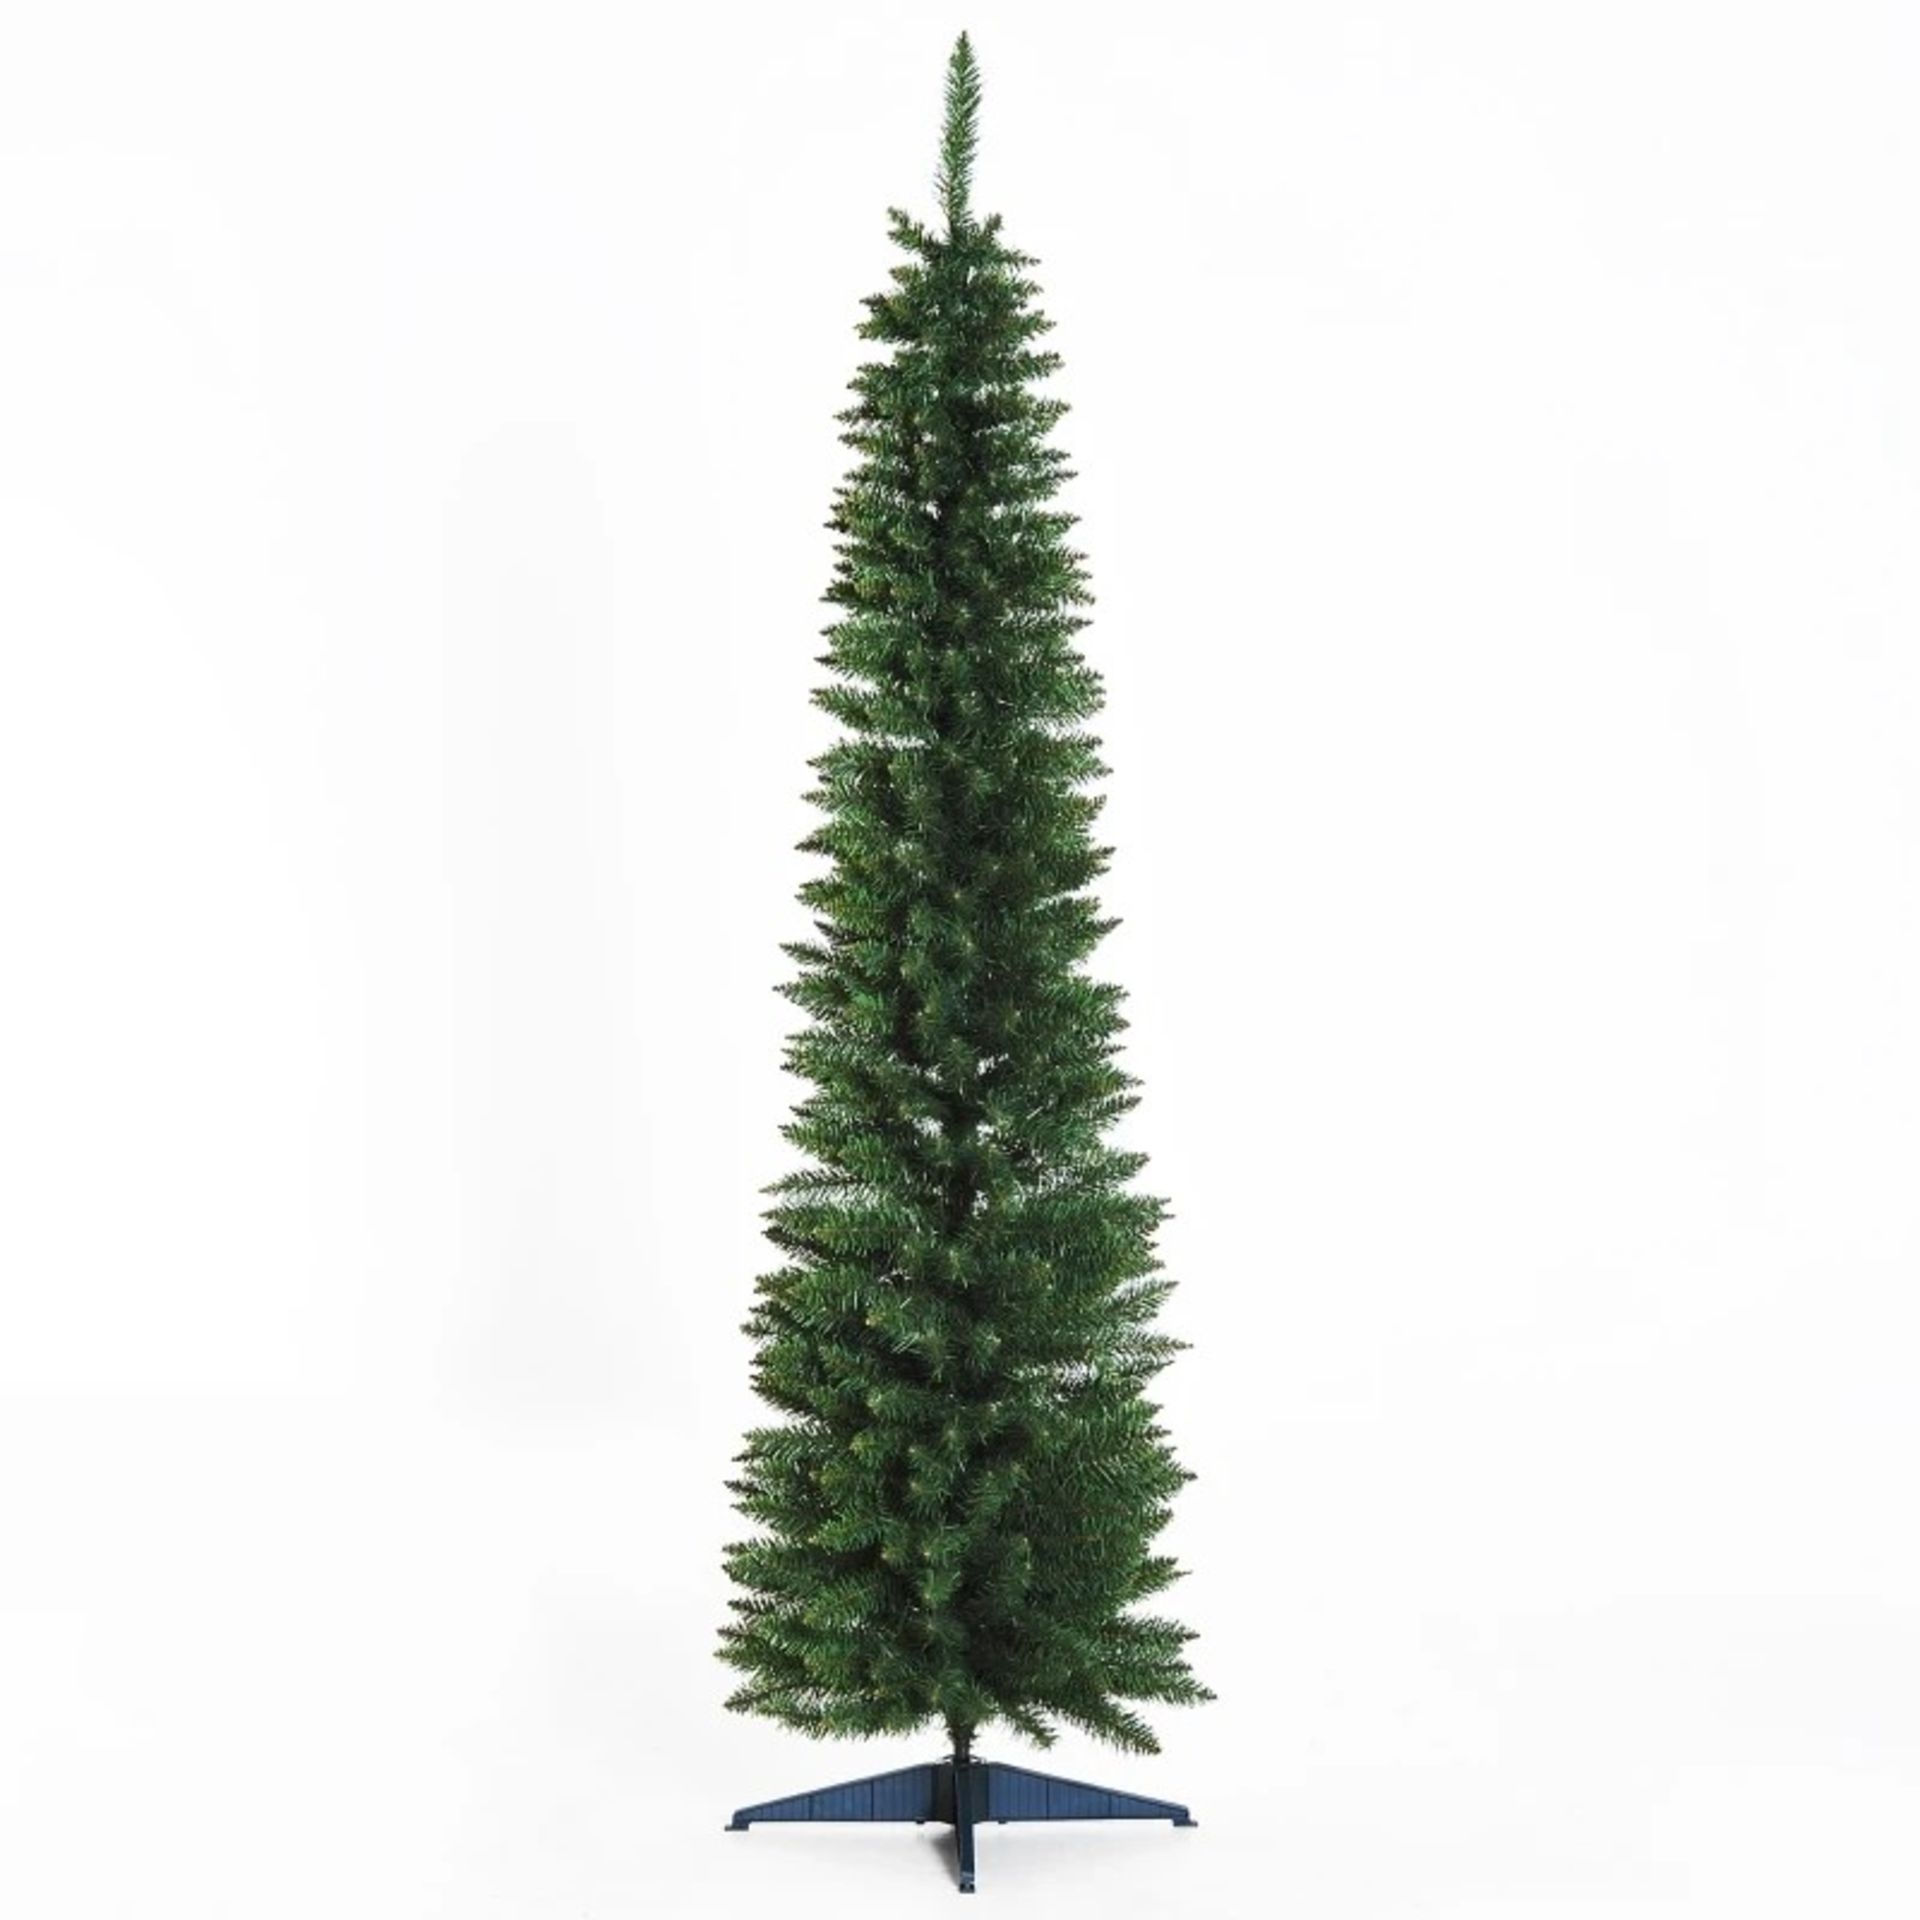 RRP £42.99 - 6FT Artificial Pine Pencil Slim Tall Christmas Tree with 390 Branch Tips Xmas Holiday